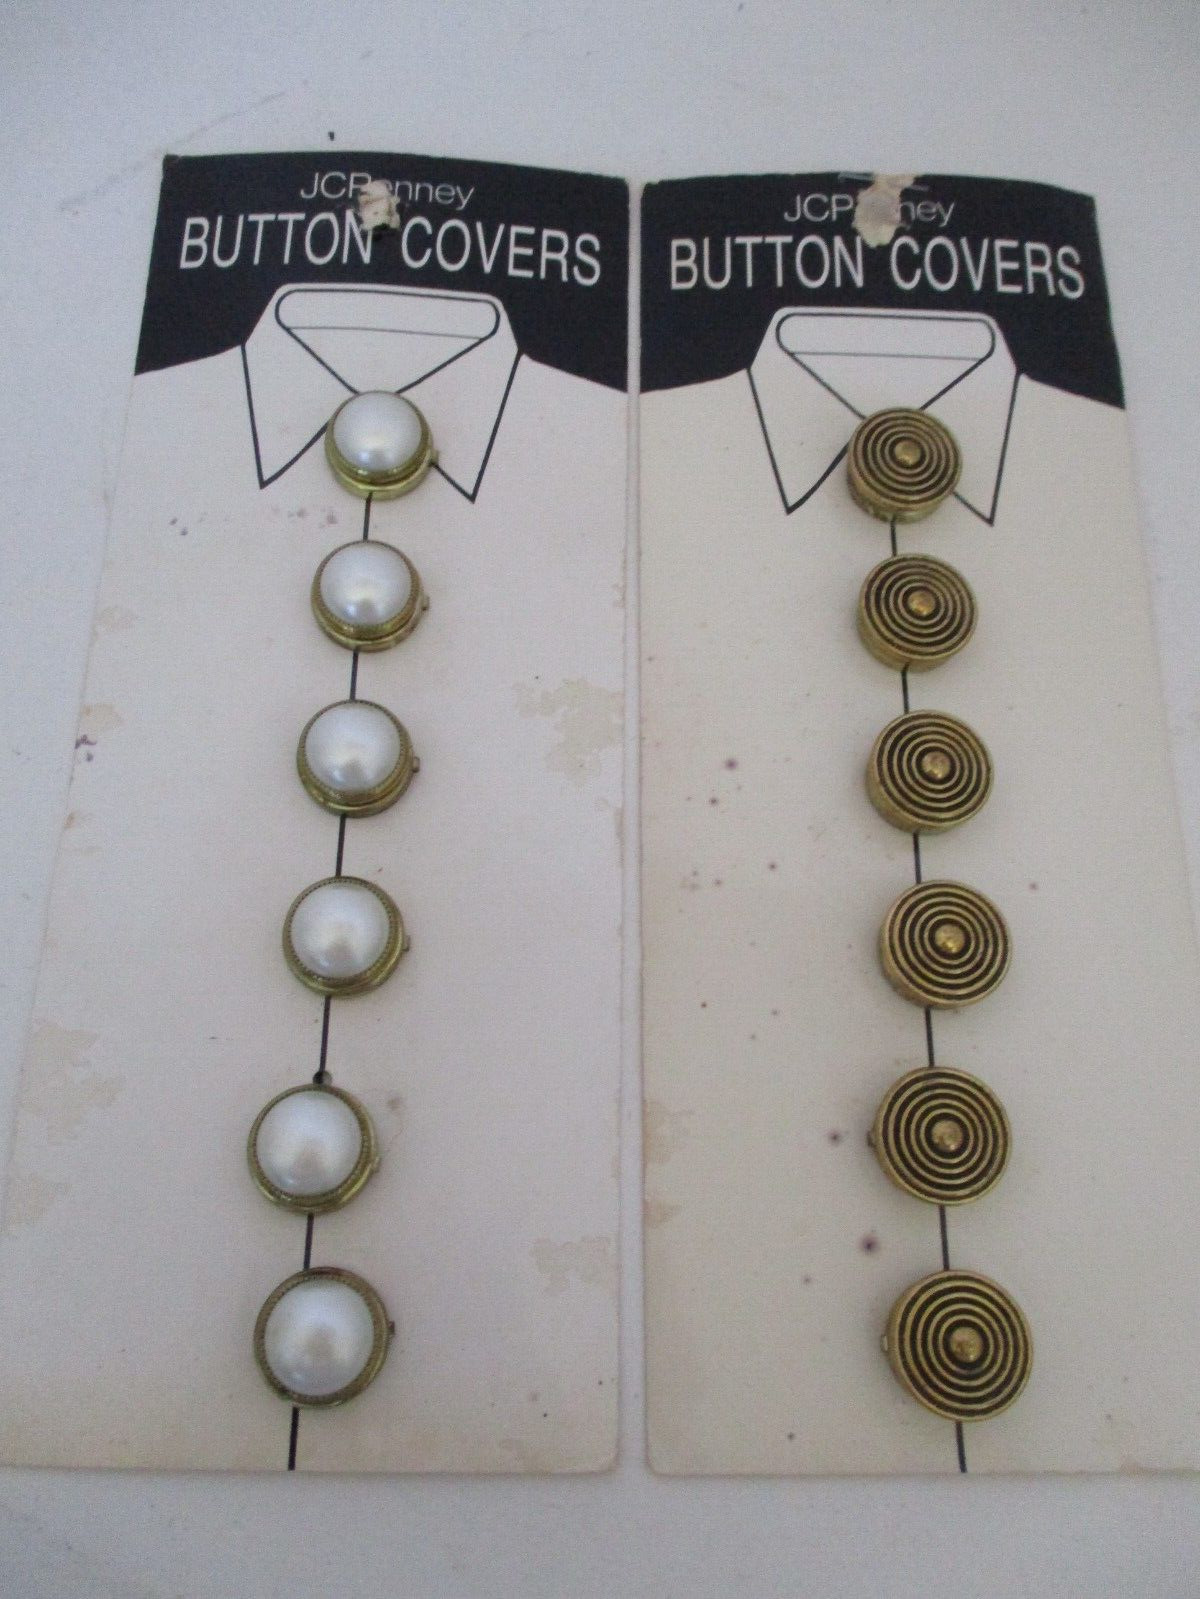 Vintage NONY New York for JCPenney Round Button Covers New On Original Card